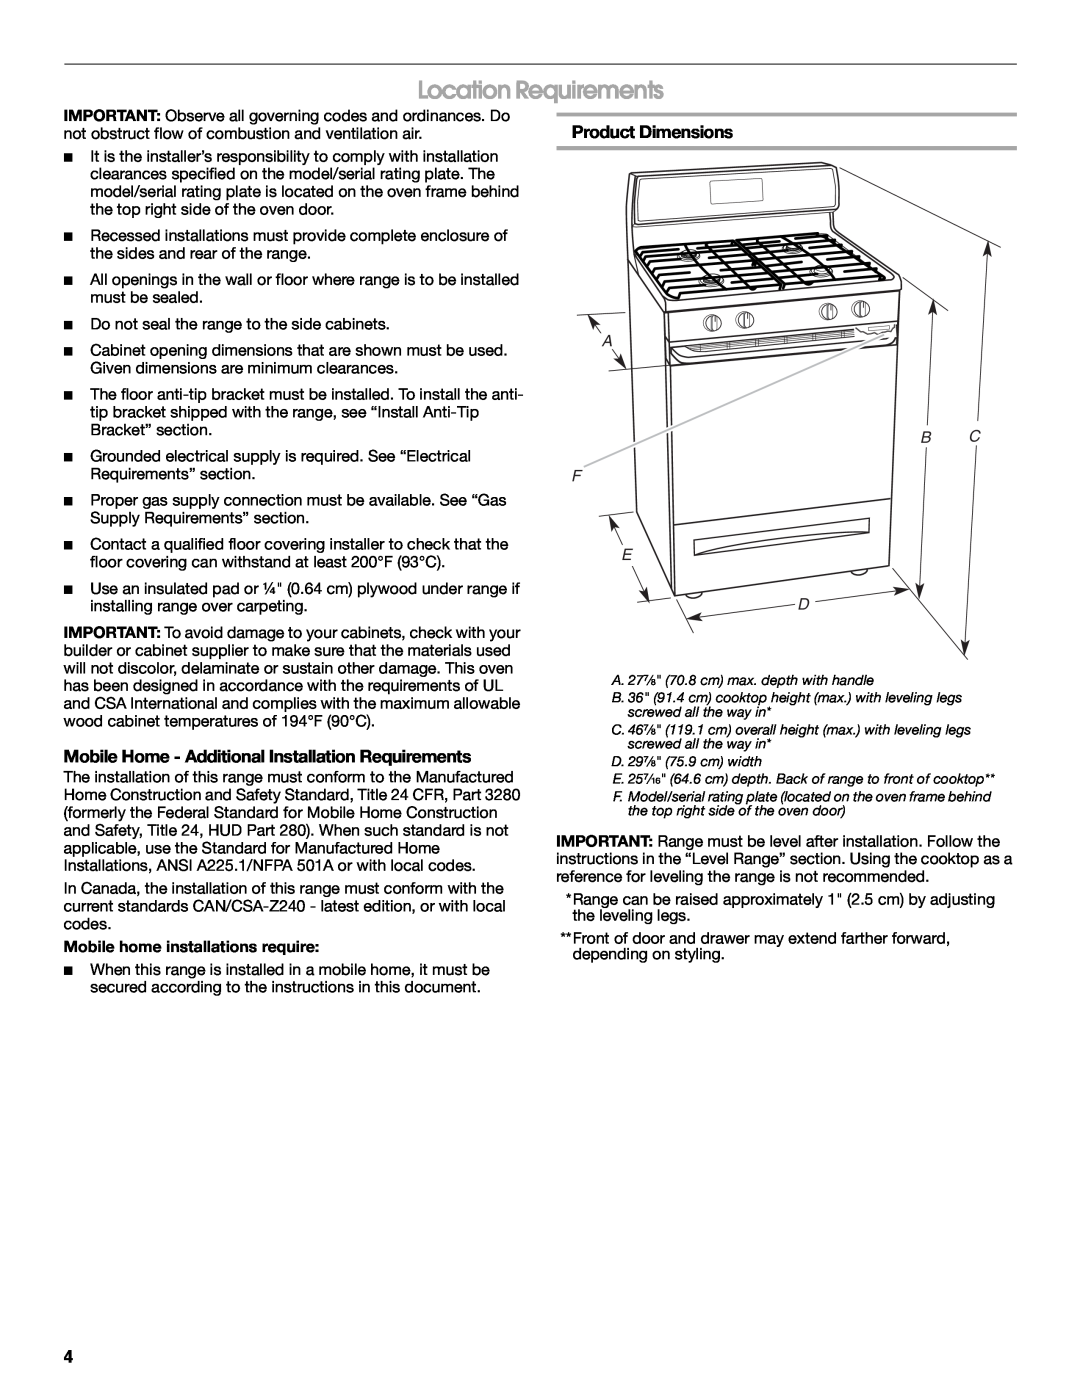 Whirlpool W10553363A Location Requirements, Mobile Home - Additional Installation Requirements, Product Dimensions 